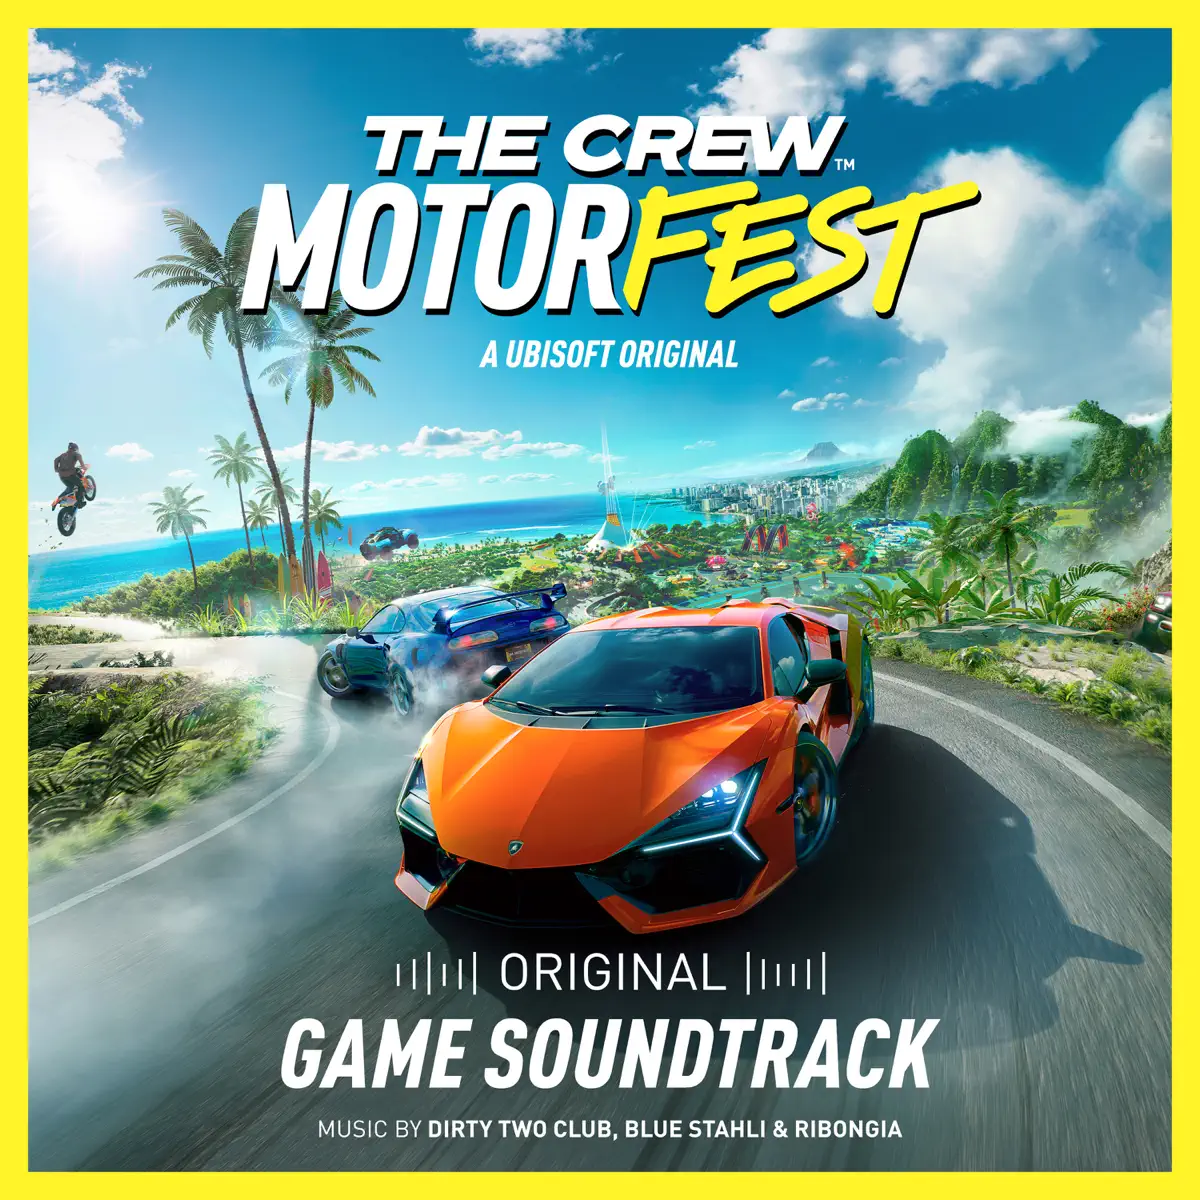 Dirty Two Club, Blue Stahli & Ribongia - The Crew: Motorfest (Original Game Soundtrack) (2023) [iTunes Plus AAC M4A]-新房子